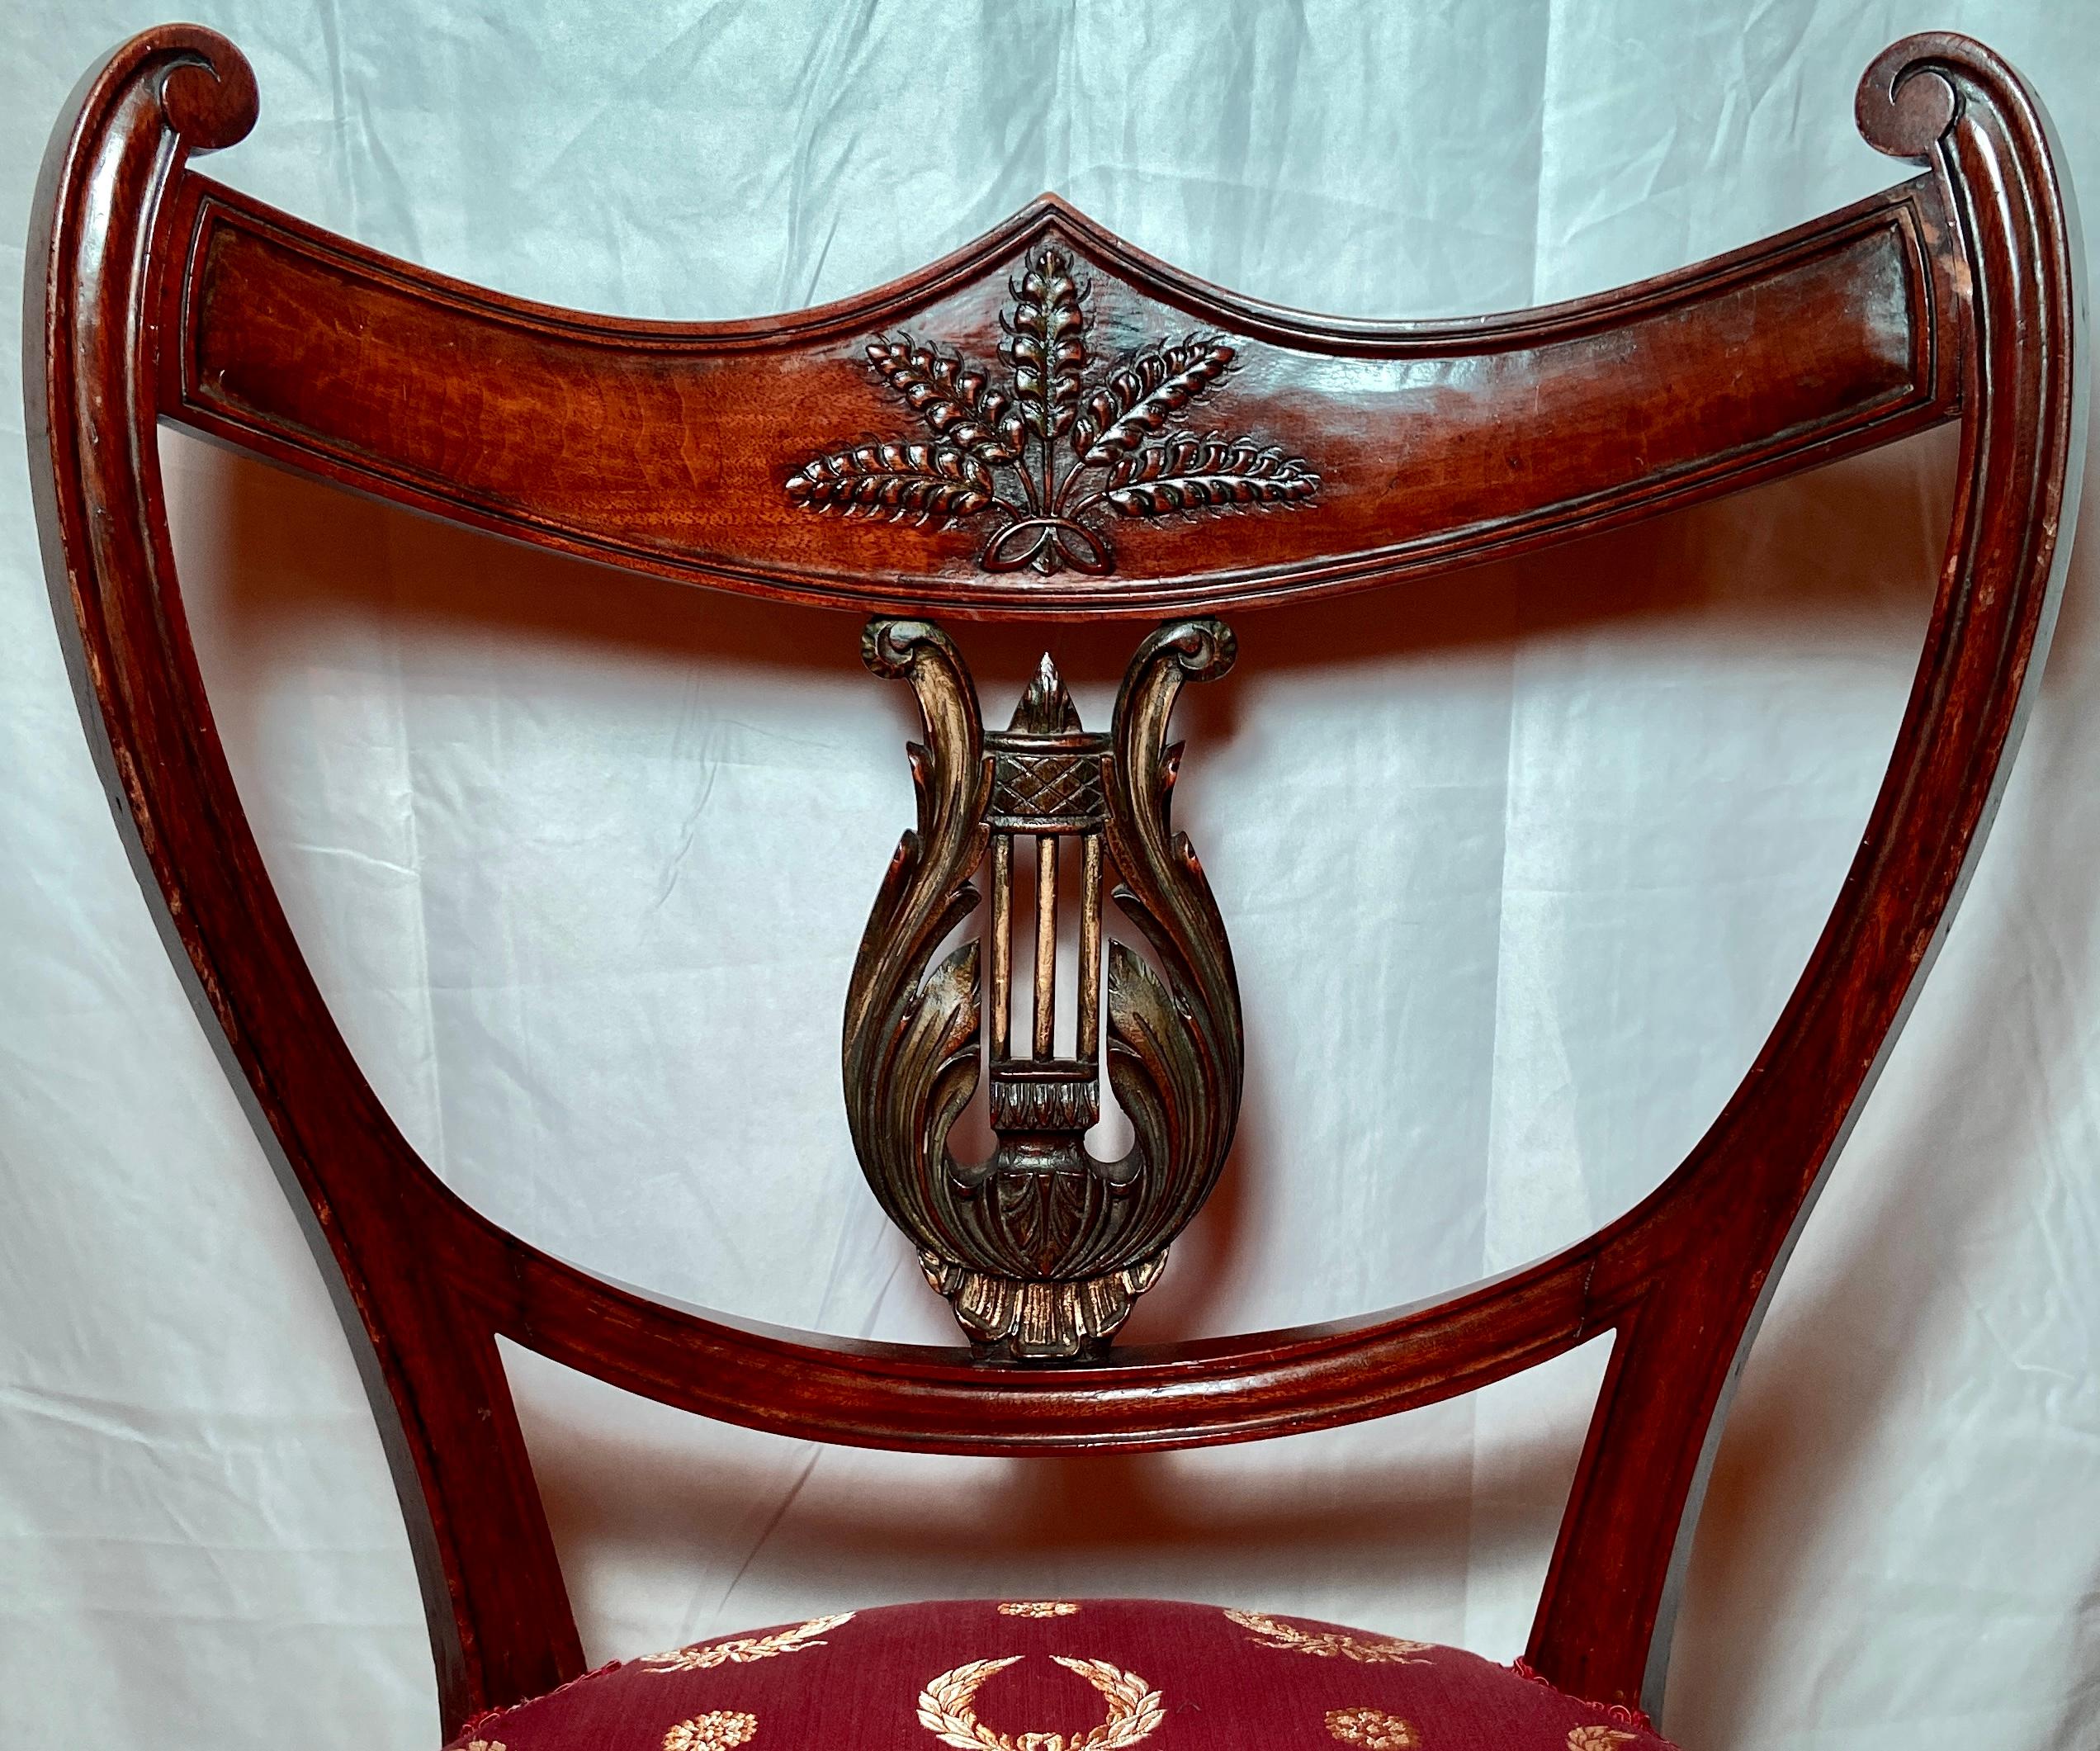 Pair antique English Regency Mahogany chairs, Circa 1820-1830. Beautiful lines and detail with new red and gold silk upholstery.